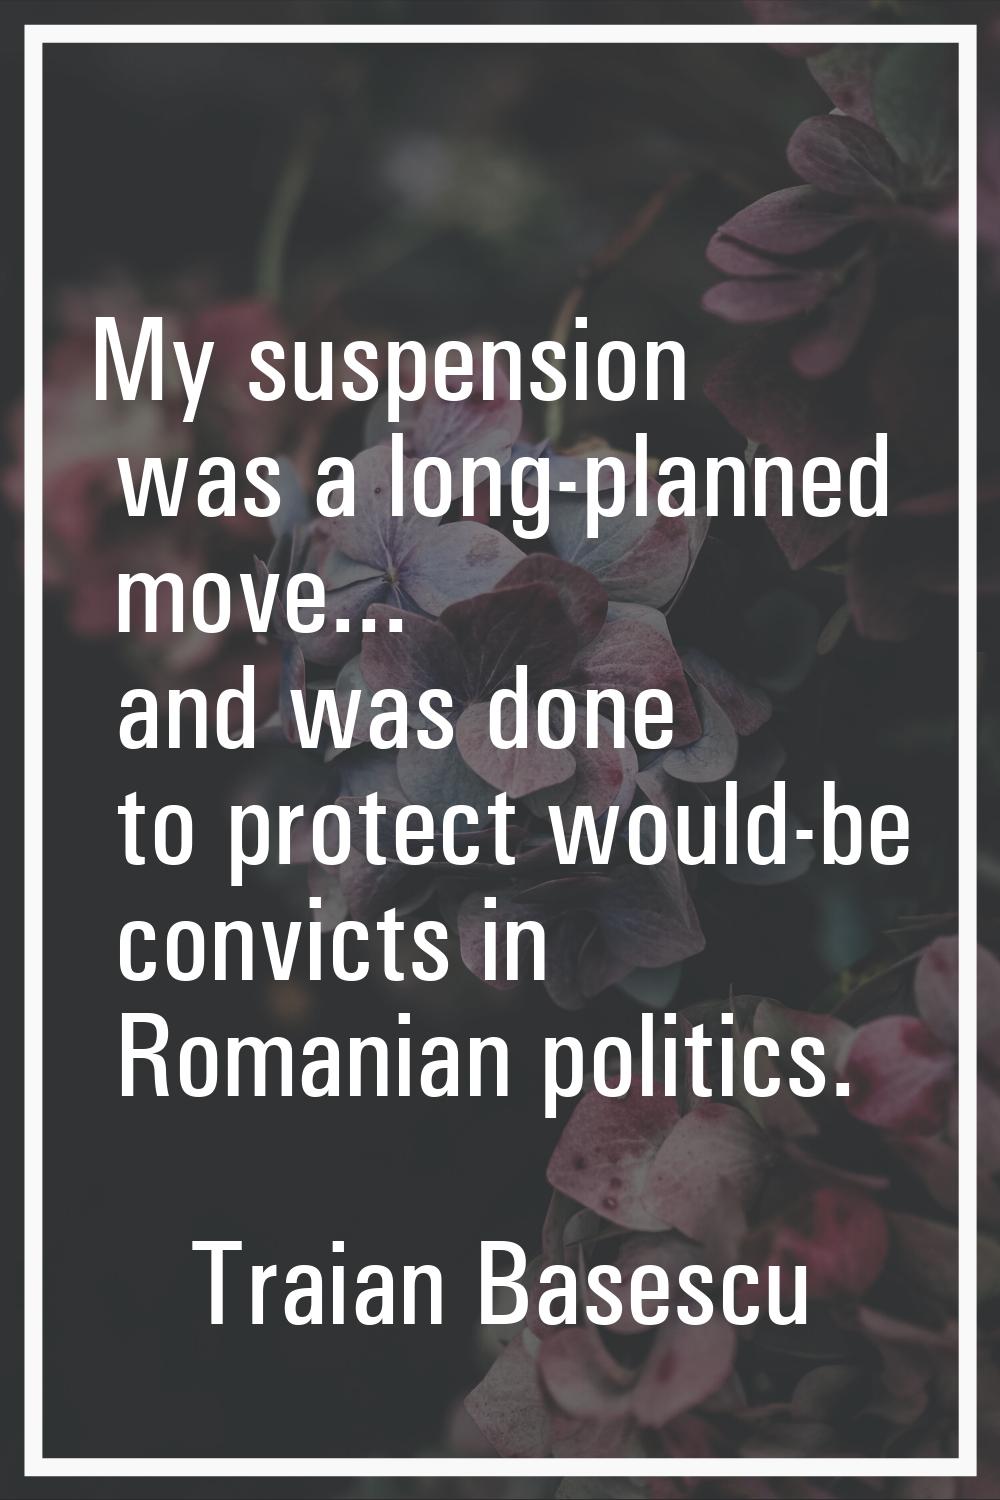 My suspension was a long-planned move... and was done to protect would-be convicts in Romanian poli